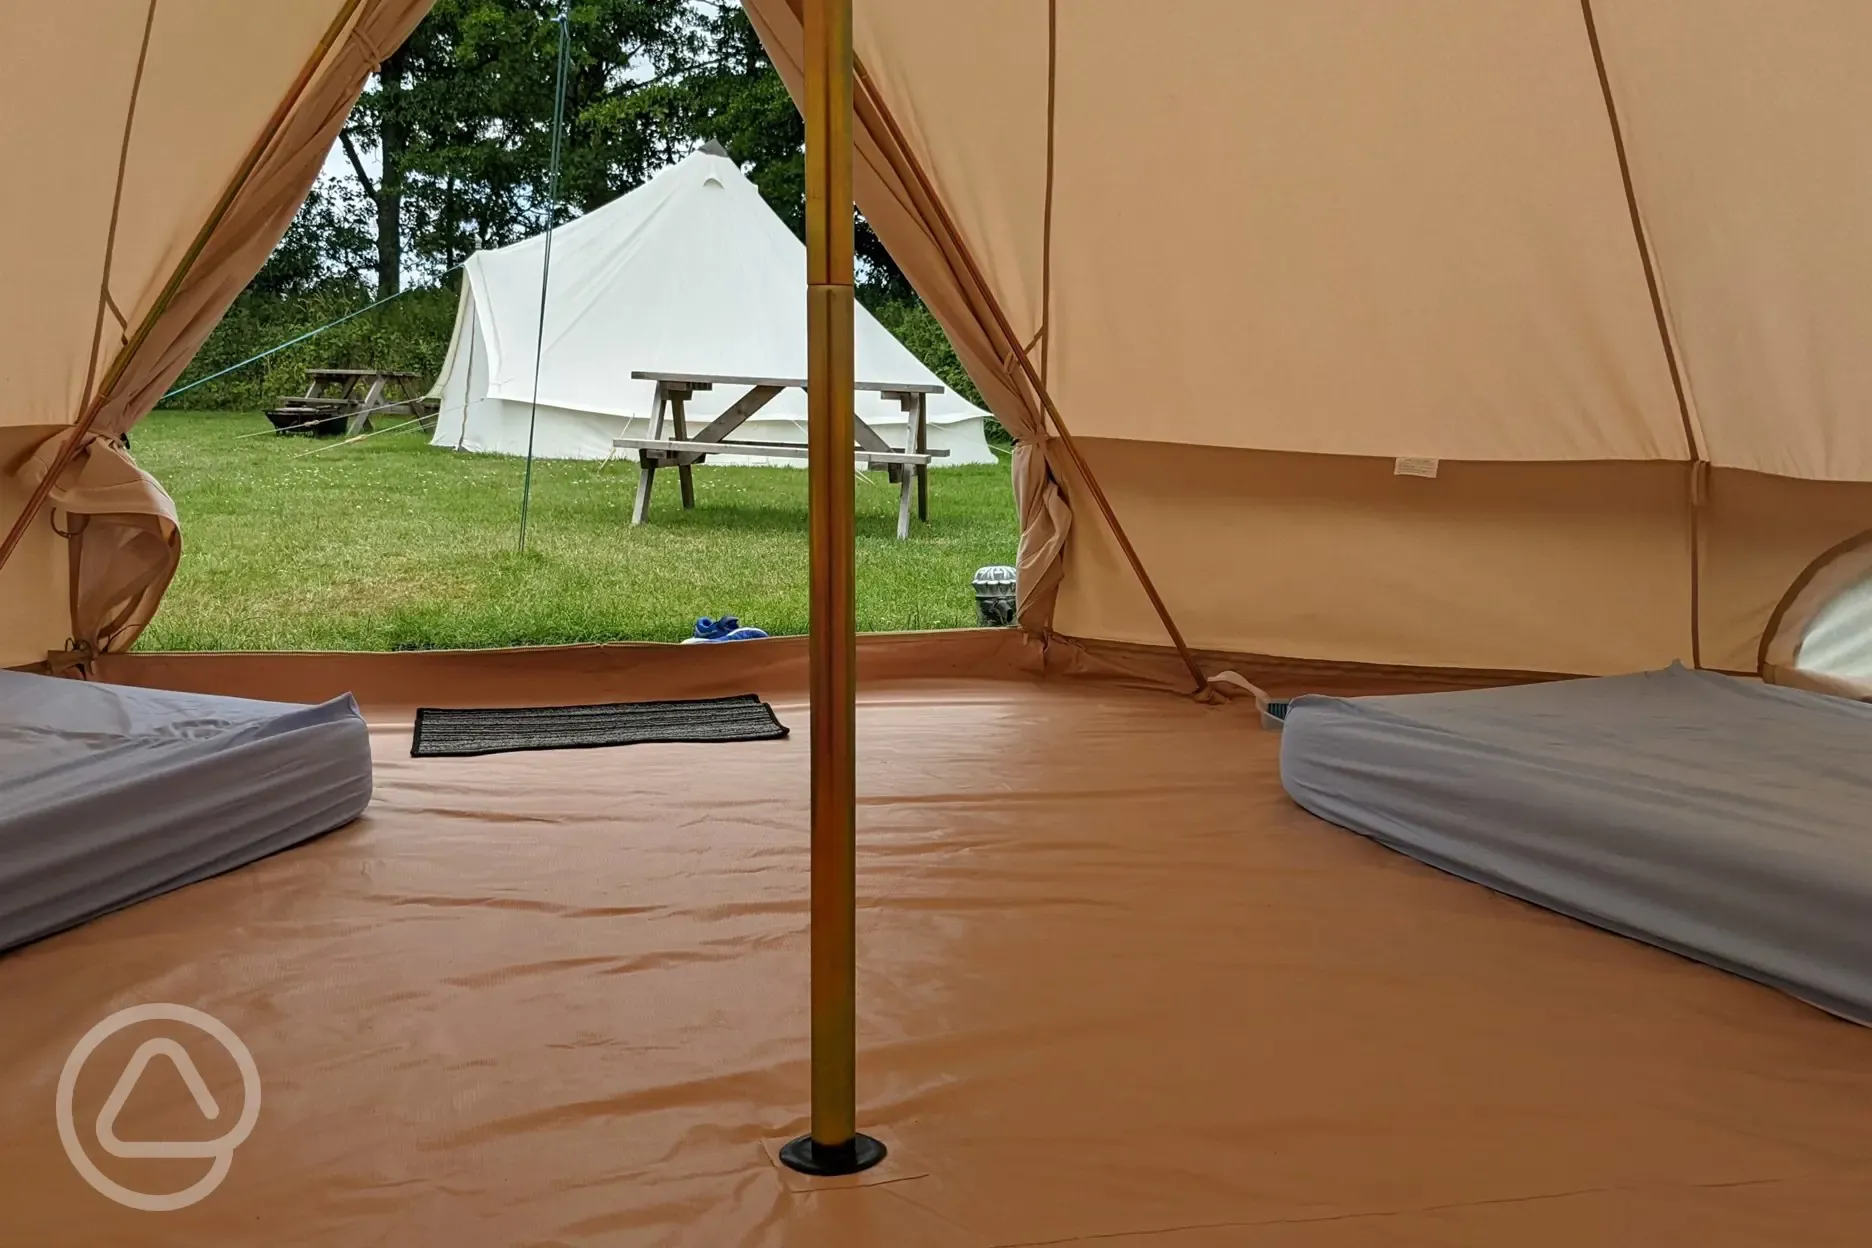 View from the bell tent